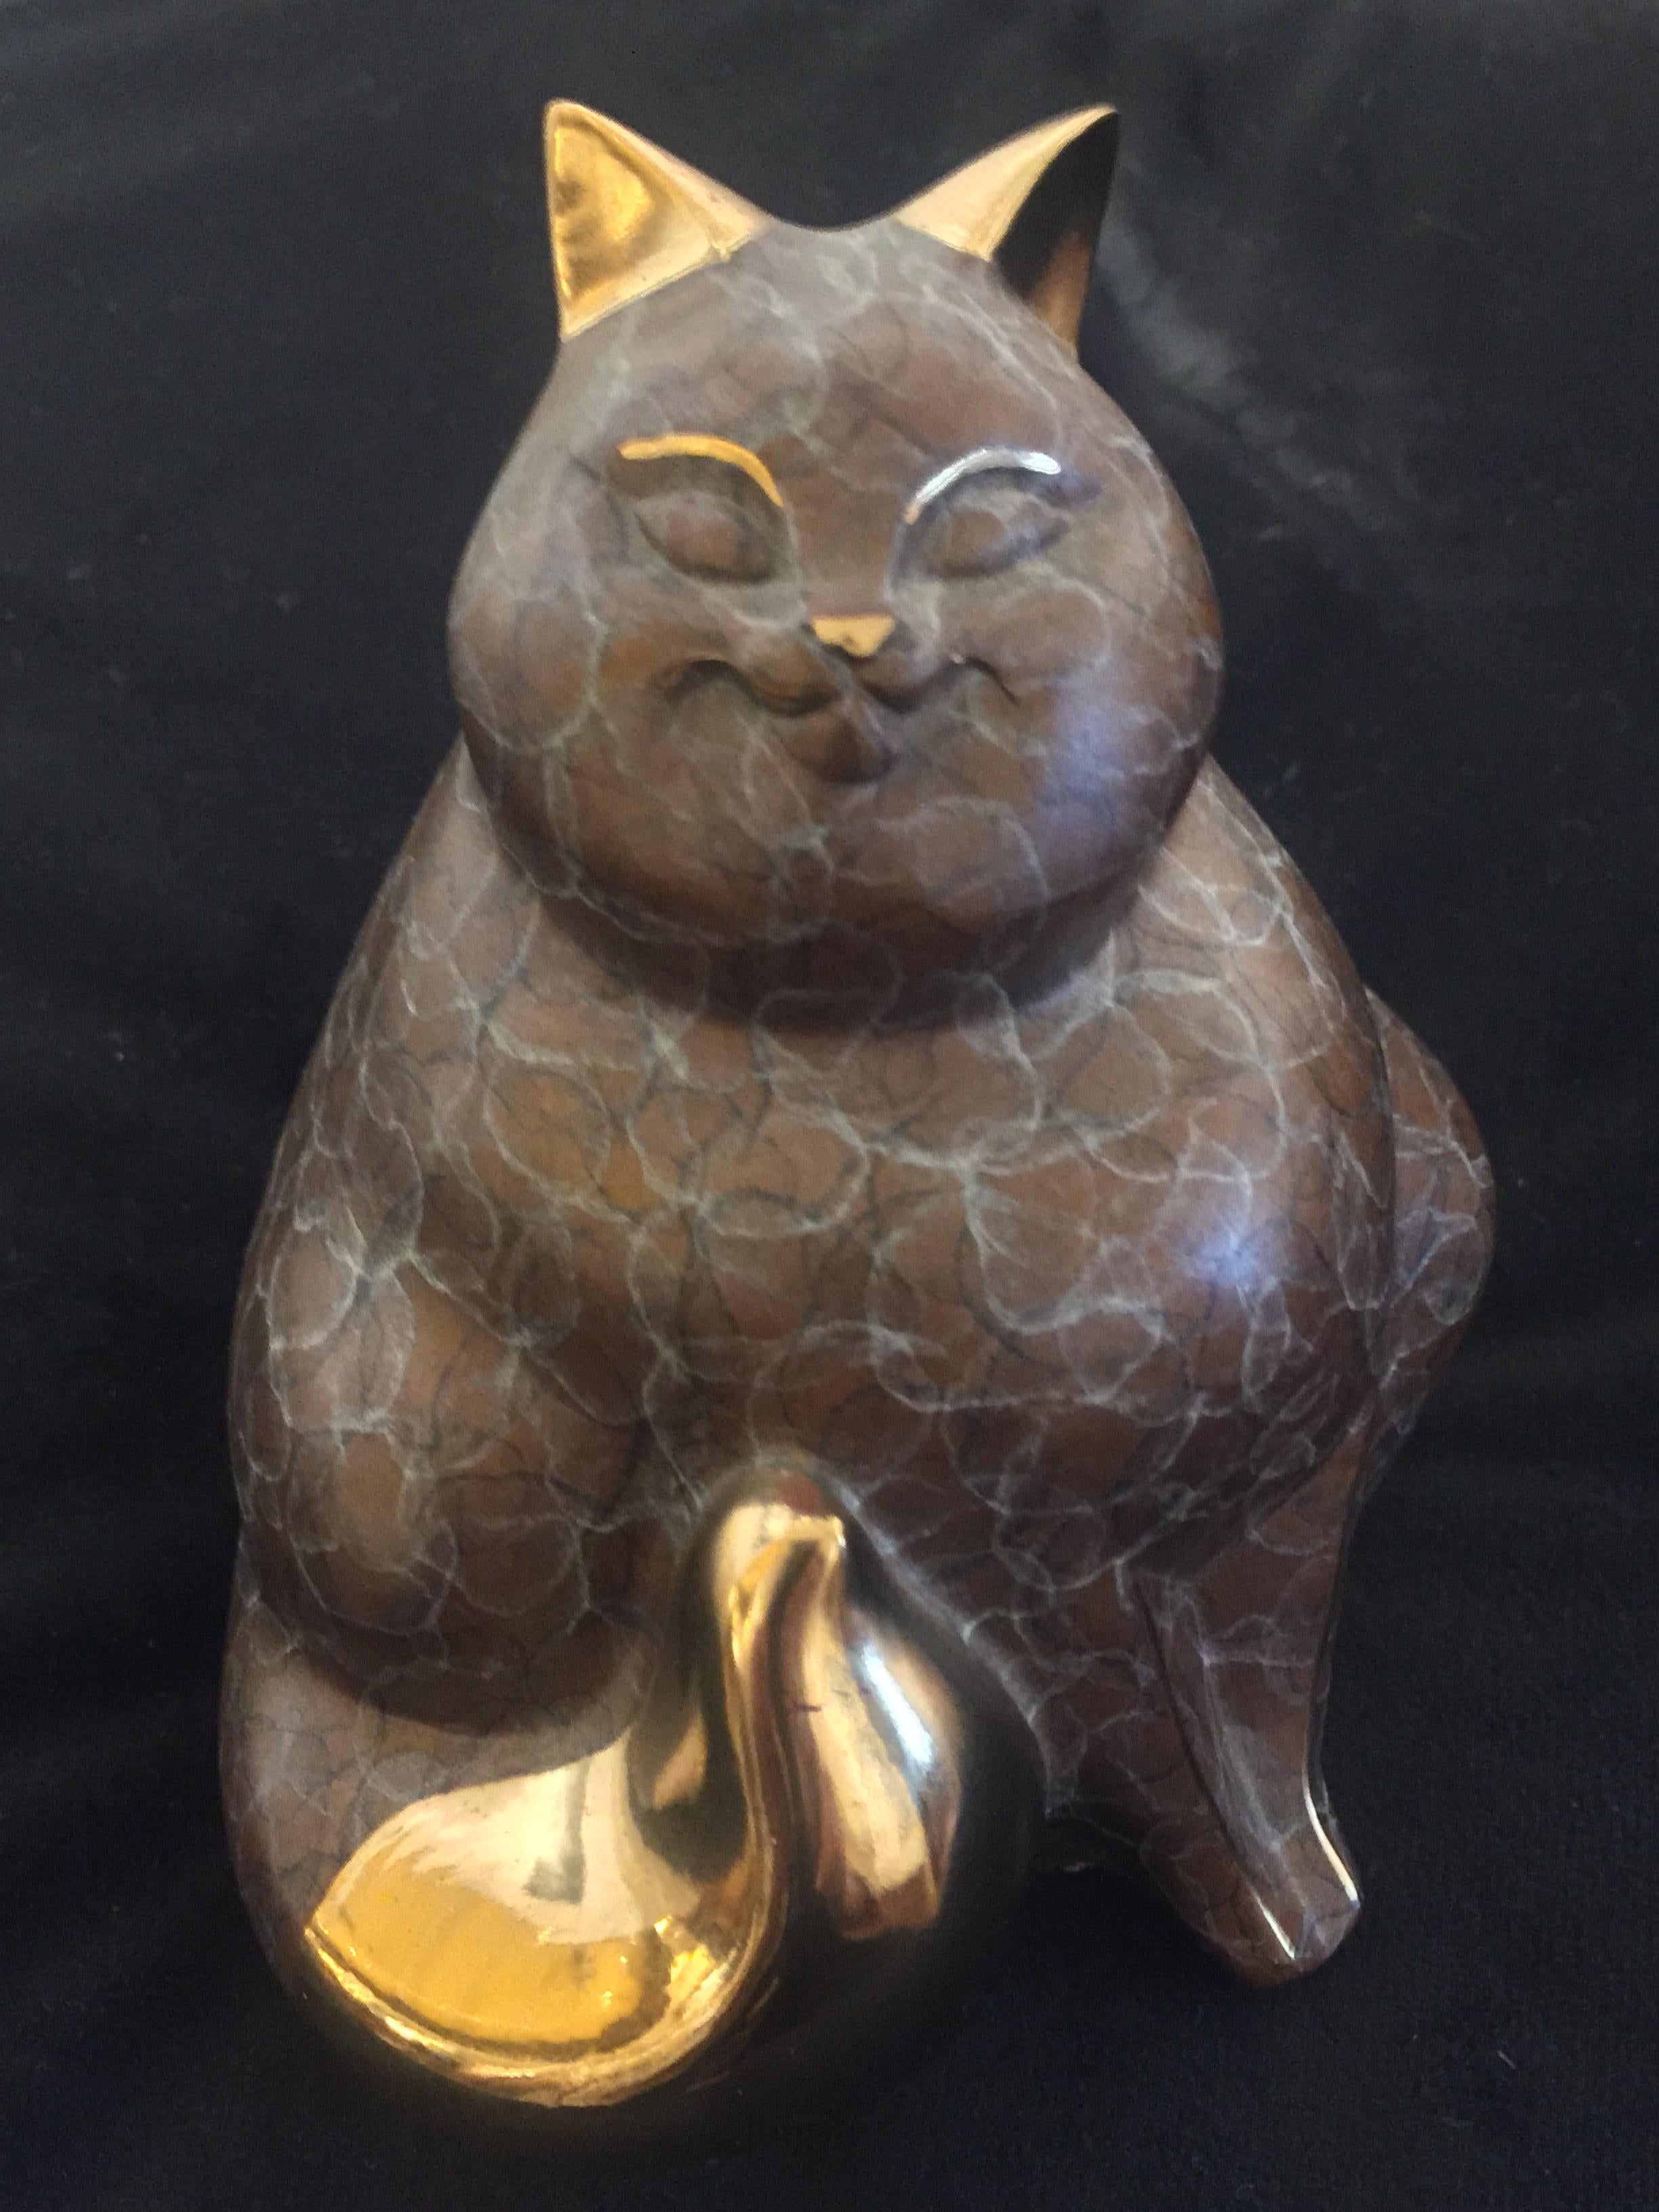 Small bronze cat sculpture with reddish brown details, accented by gold and silver highlights on eyes, ears, front legs, and tail. Marks on low back 